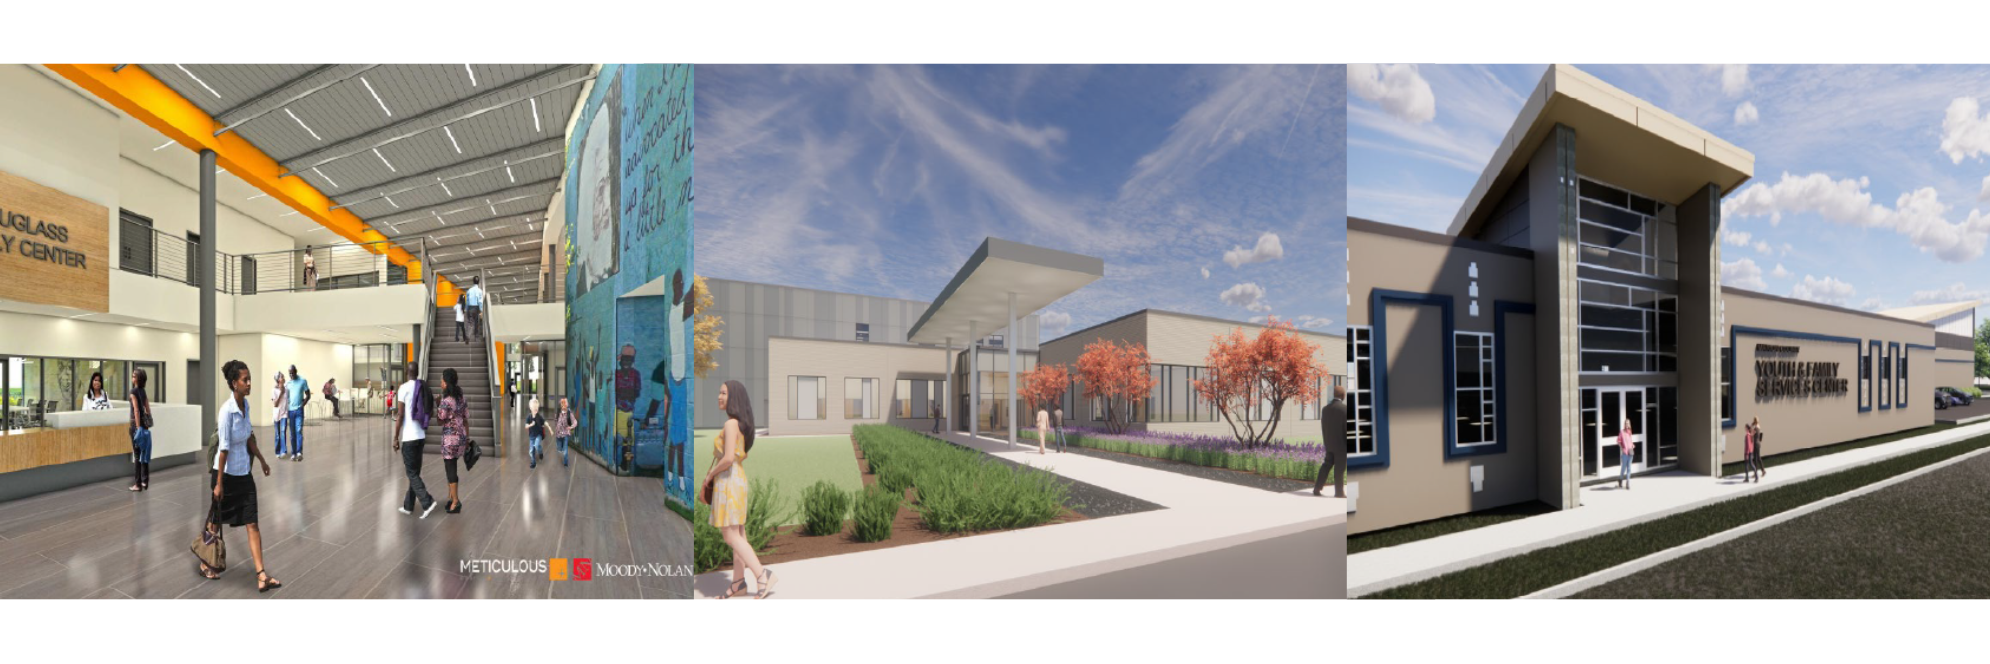 Renderings from left to right: Fredrick Douglass Park, Forensics Facility, Youth and Family Services Center